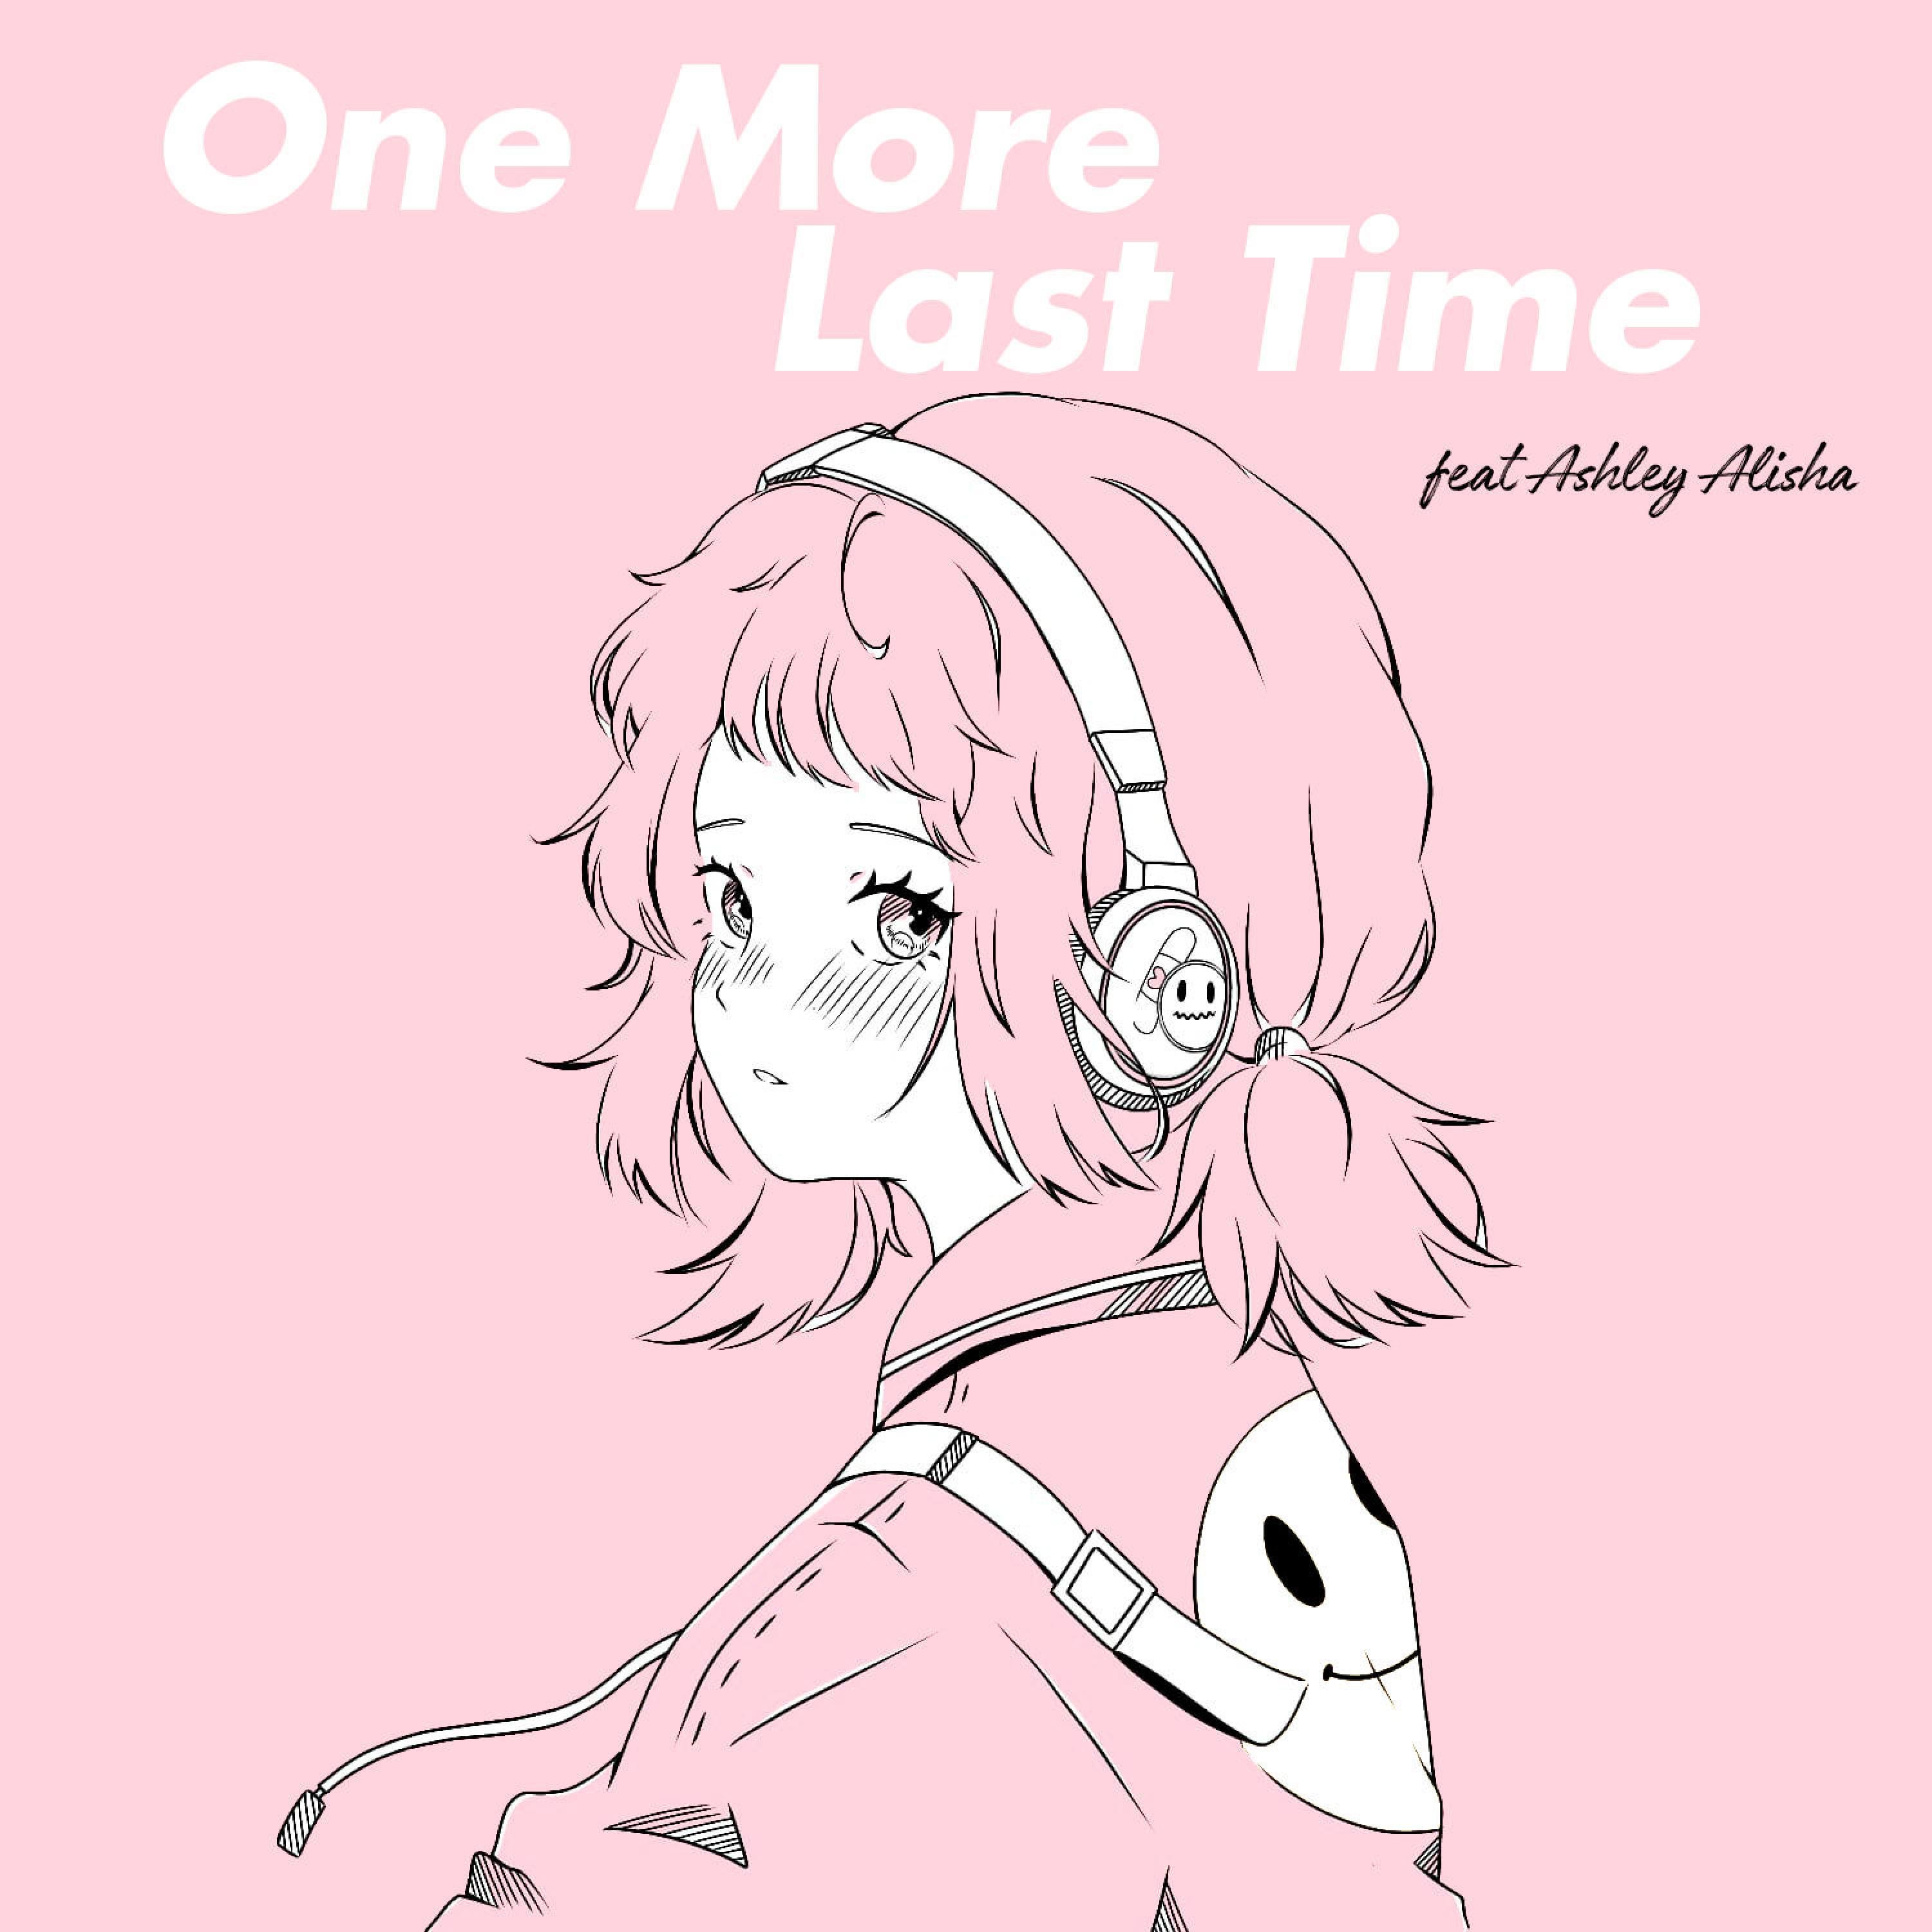 Henry Young/Ashley Alisha《One More Last Time》[FLAC/MP3-320K]